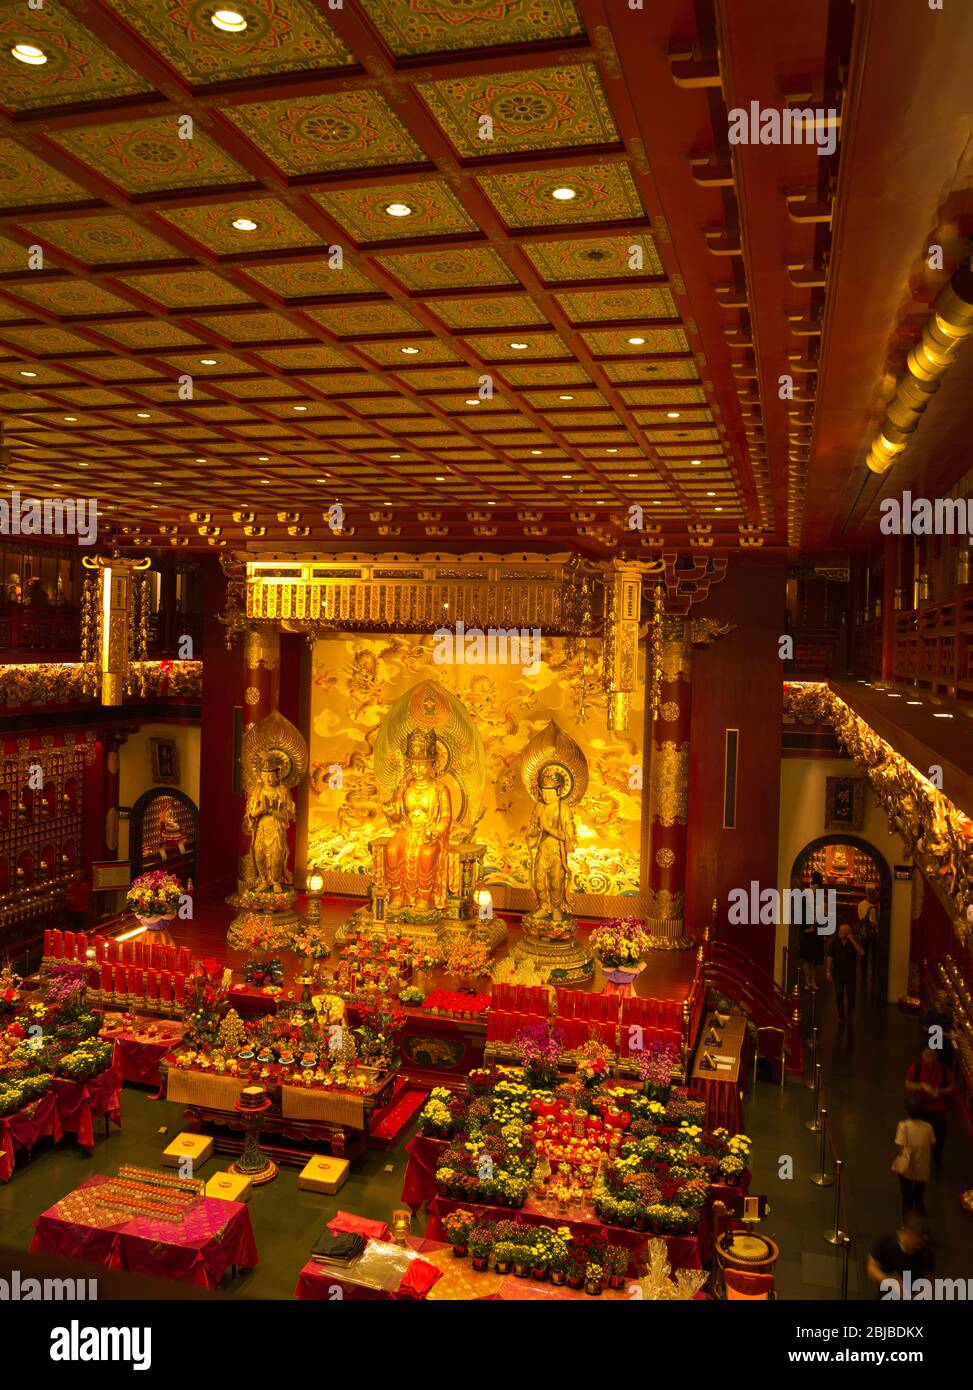 dh Buddha Tooth Relic Temple CHINATOWN SINGAPORE Interior Buddhist temples museum altars heritage culture Stock Photo